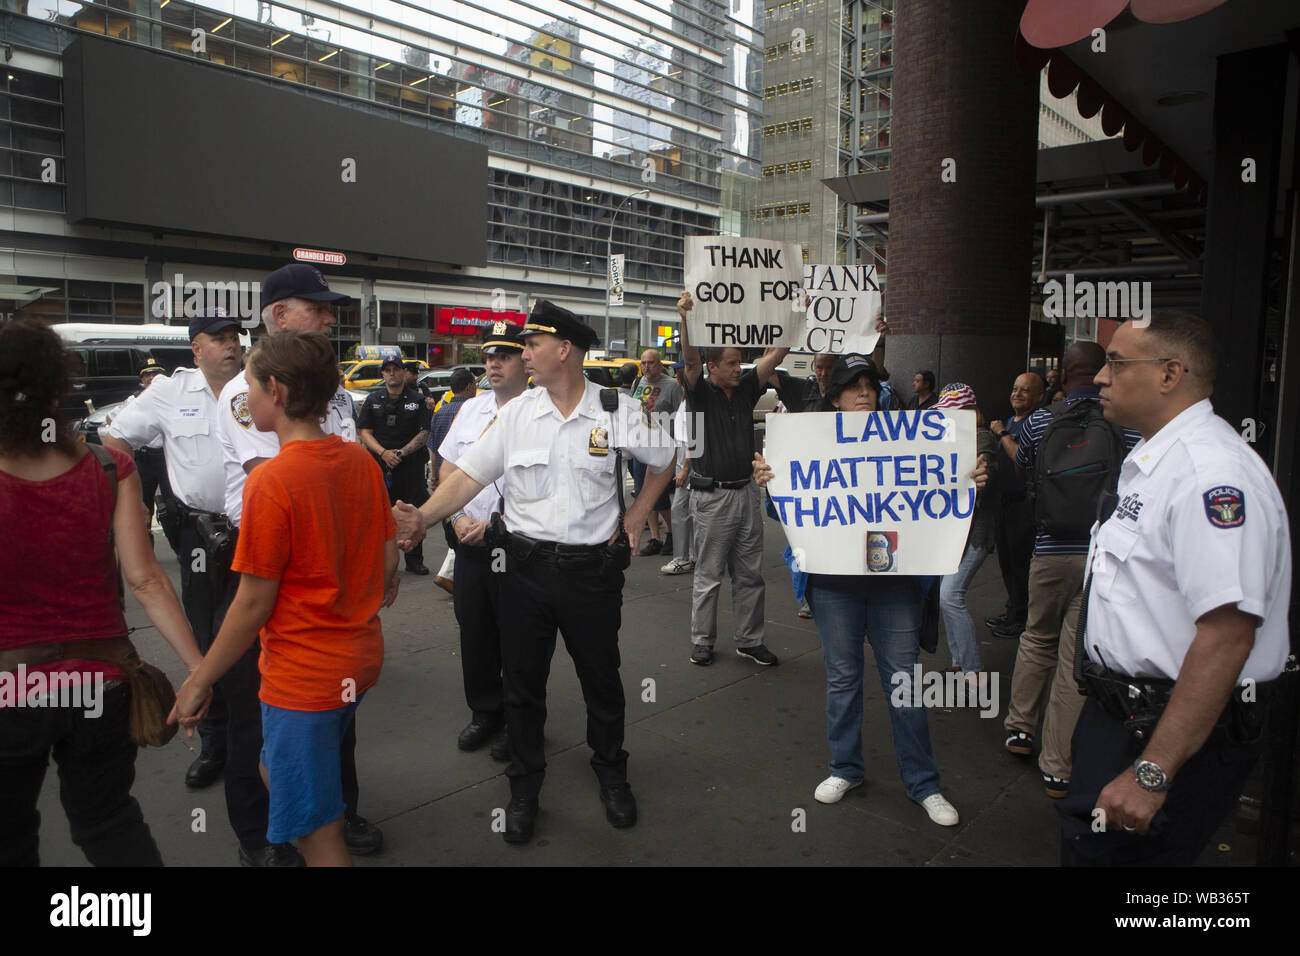 August 23, 2019: New York Police officers stands in front anti-protestors during a protest against Greyhound Corporation and ICE (Immigration Customs and Enforcement) at the Port Authority Bus Terminal on 42nd and 8th Avenue in New York, New York. About 100 activists from a coalition of groups including FIRE (Fight For Immigrant Refugees Everywhere) protested Greyhound allowing ICE agents to board their busses 'searching for migrants,'' officials said. Credit: Brian Branch Price/ZUMA Wire/Alamy Live News Stock Photo